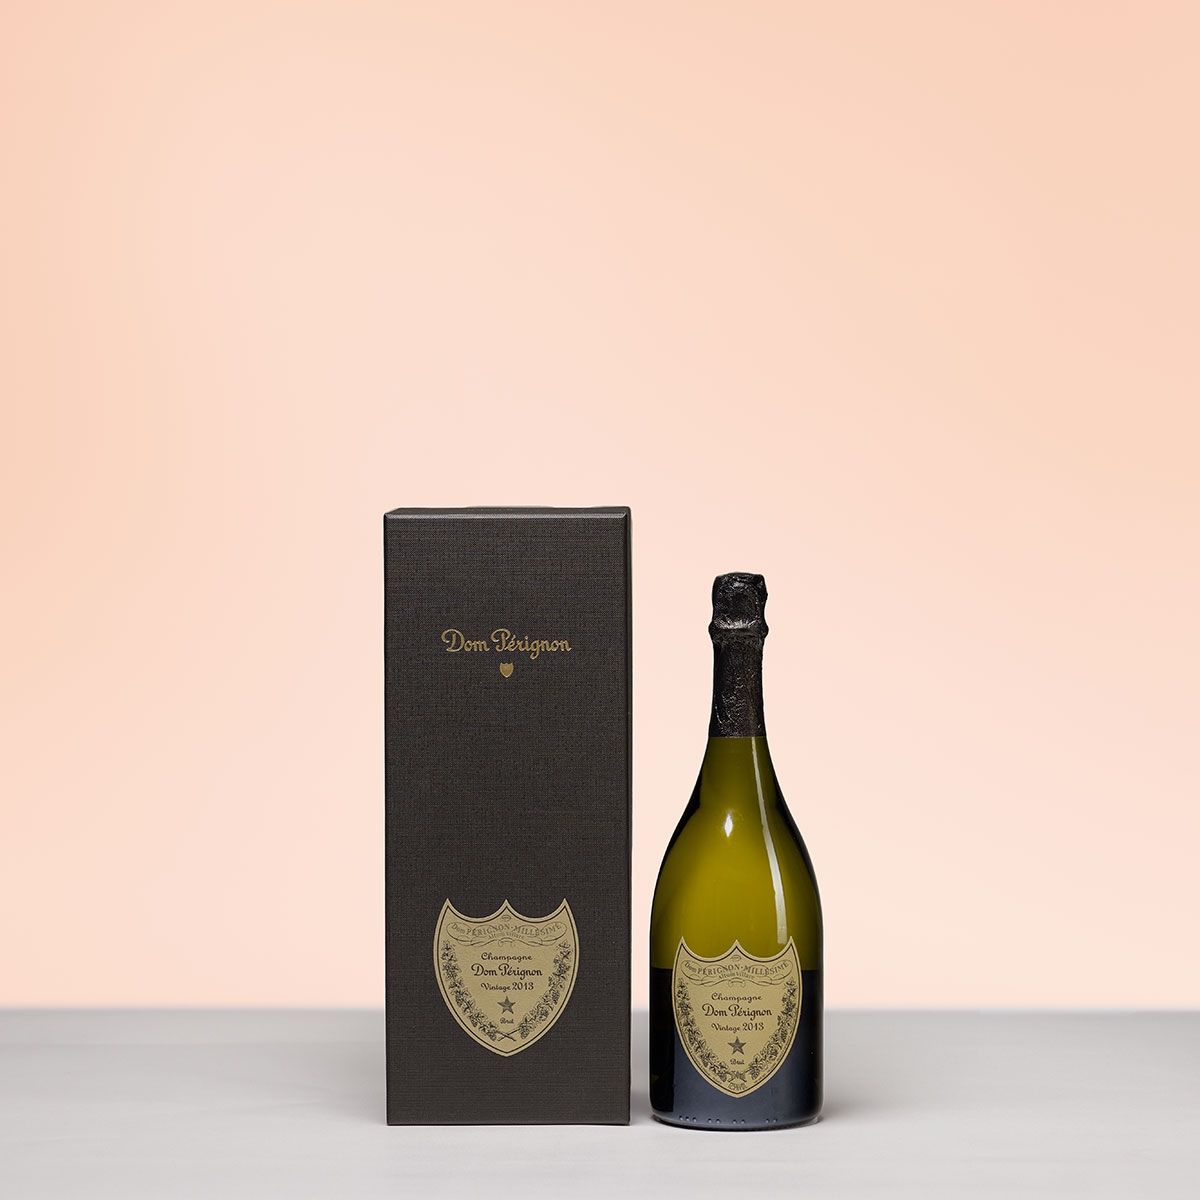 Dom Pérignon Champagne Vintage 2013 Box, by - 75 in cl Gift Delivery in GiftsForEurope Germany